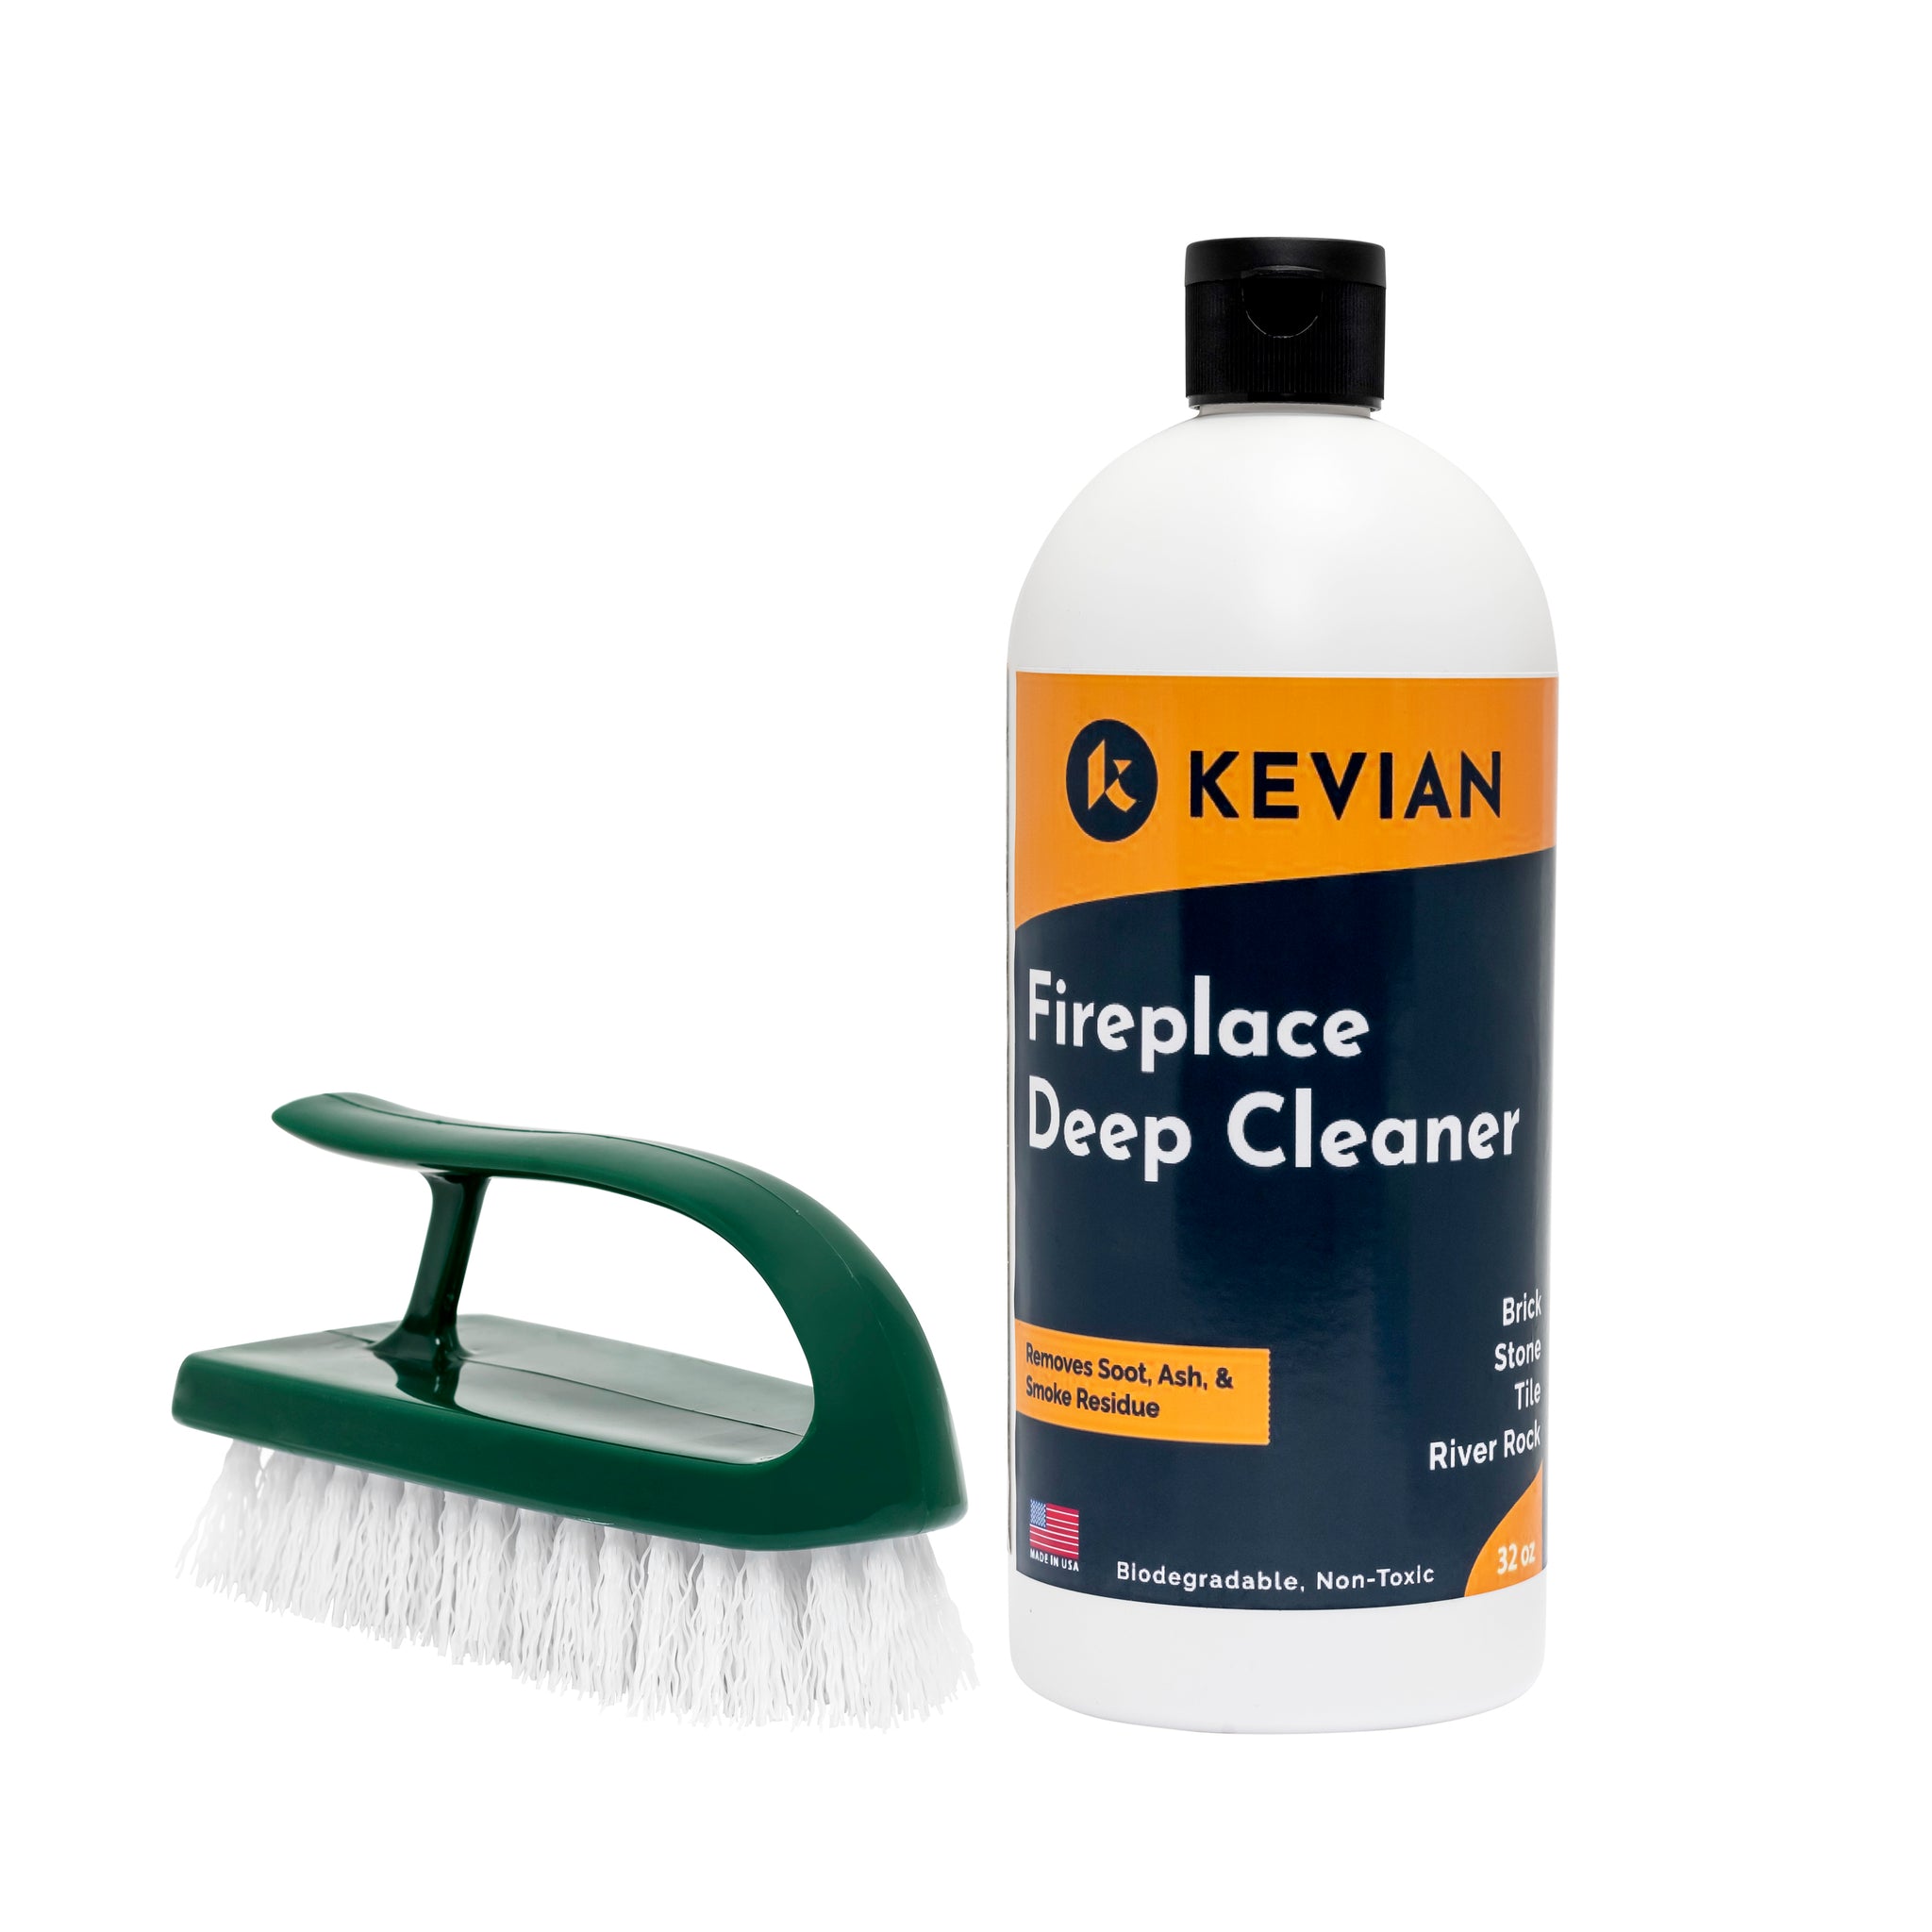 Kevian Fireplace Deep Cleaning Kit